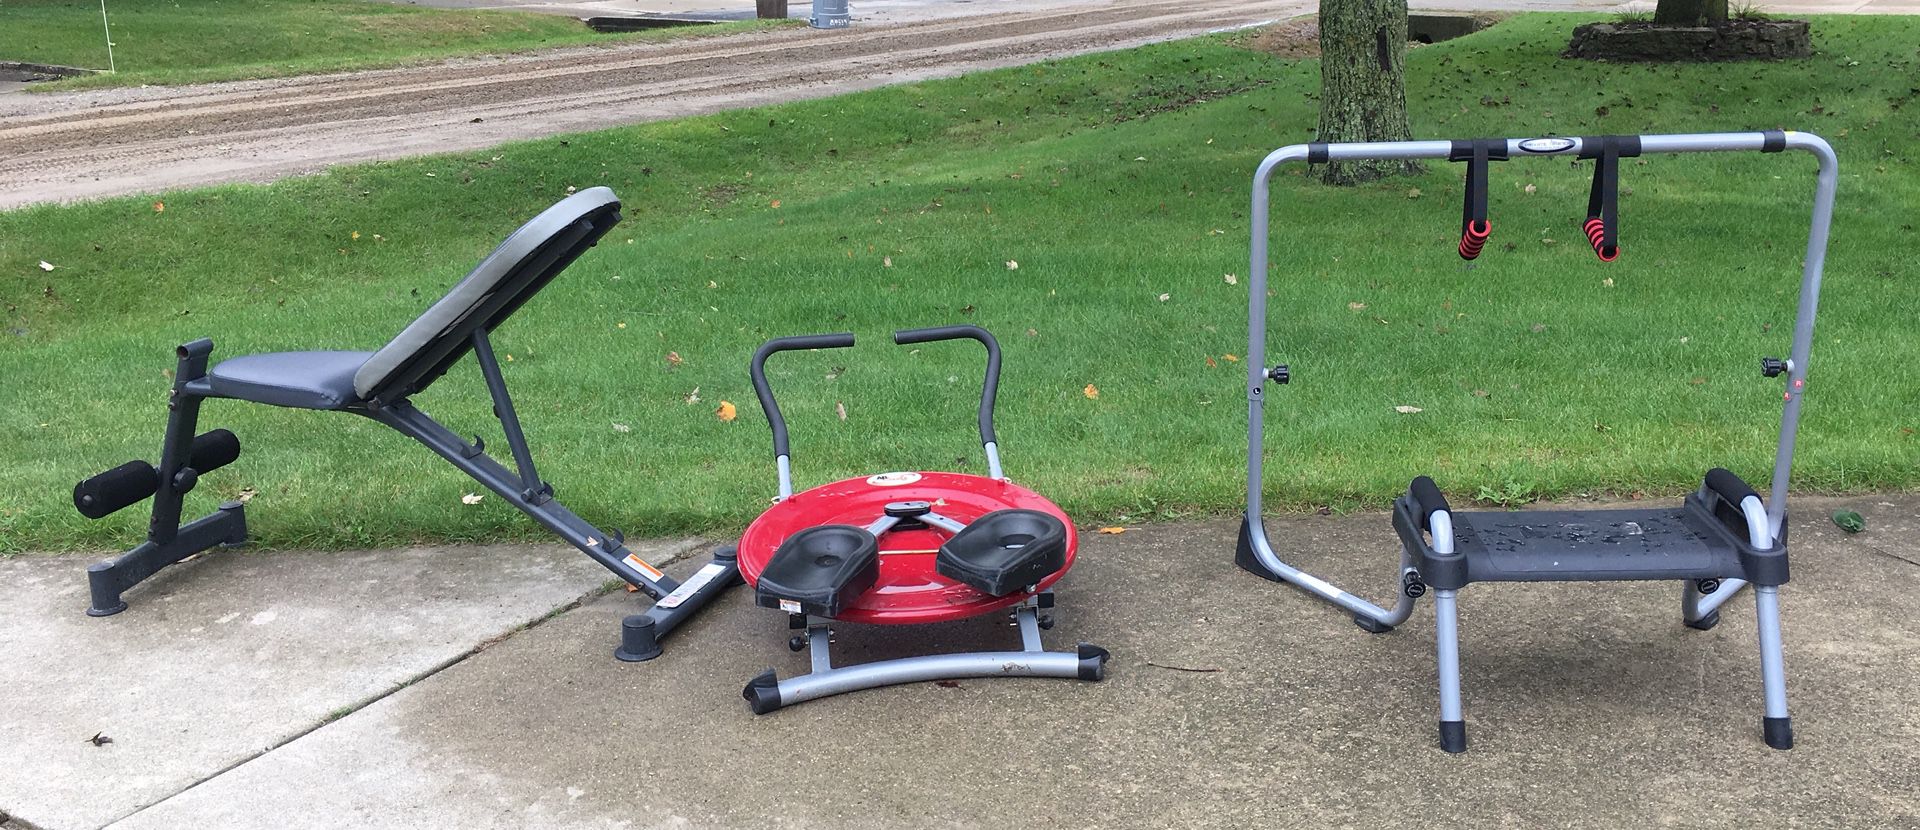 Exercise equipment 20$ 3 items pickup only